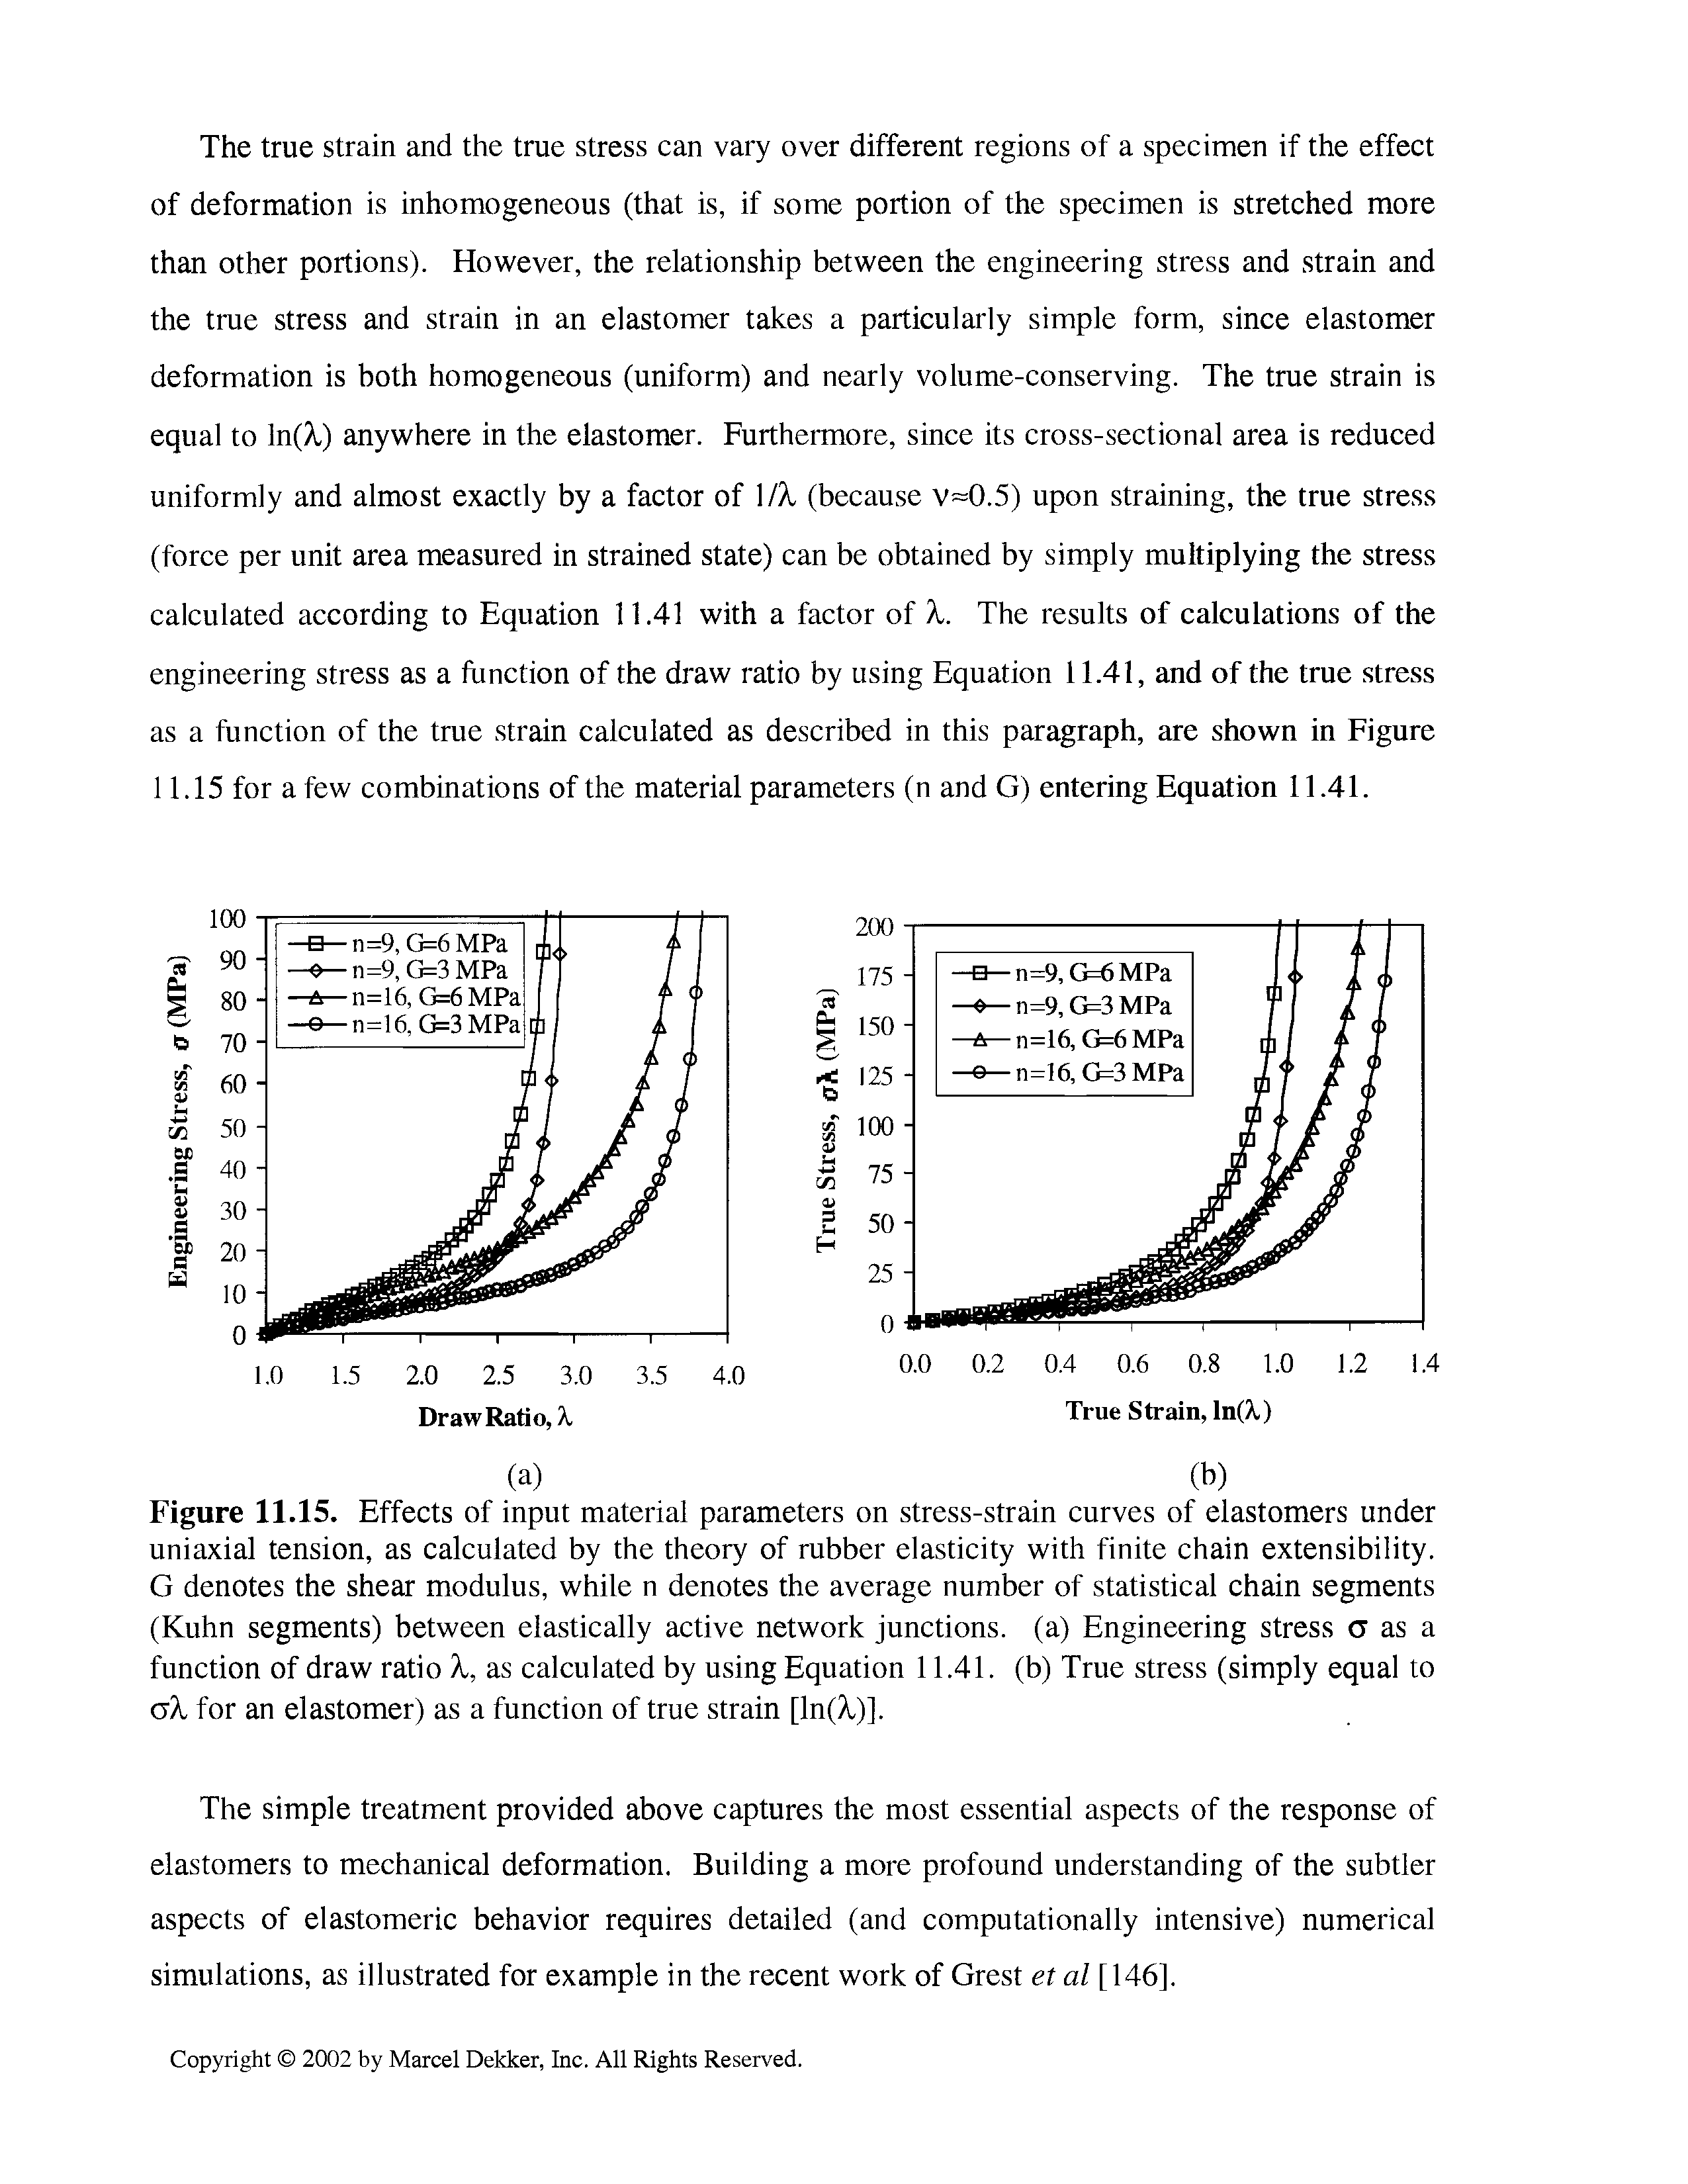 Figure 11.15. Effects of input material parameters on stress-strain curves of elastomers under uniaxial tension, as calculated by the theory of rubber elasticity with finite chain extensibility. G denotes the shear modulus, while n denotes the average number of statistical chain segments (Kuhn segments) between elastically active network junctions, (a) Engineering stress a as a function of draw ratio X, as calculated by using Equation 11.41. (b) True stress (simply equal to aX for an elastomer) as a function of true strain [In (A,)].